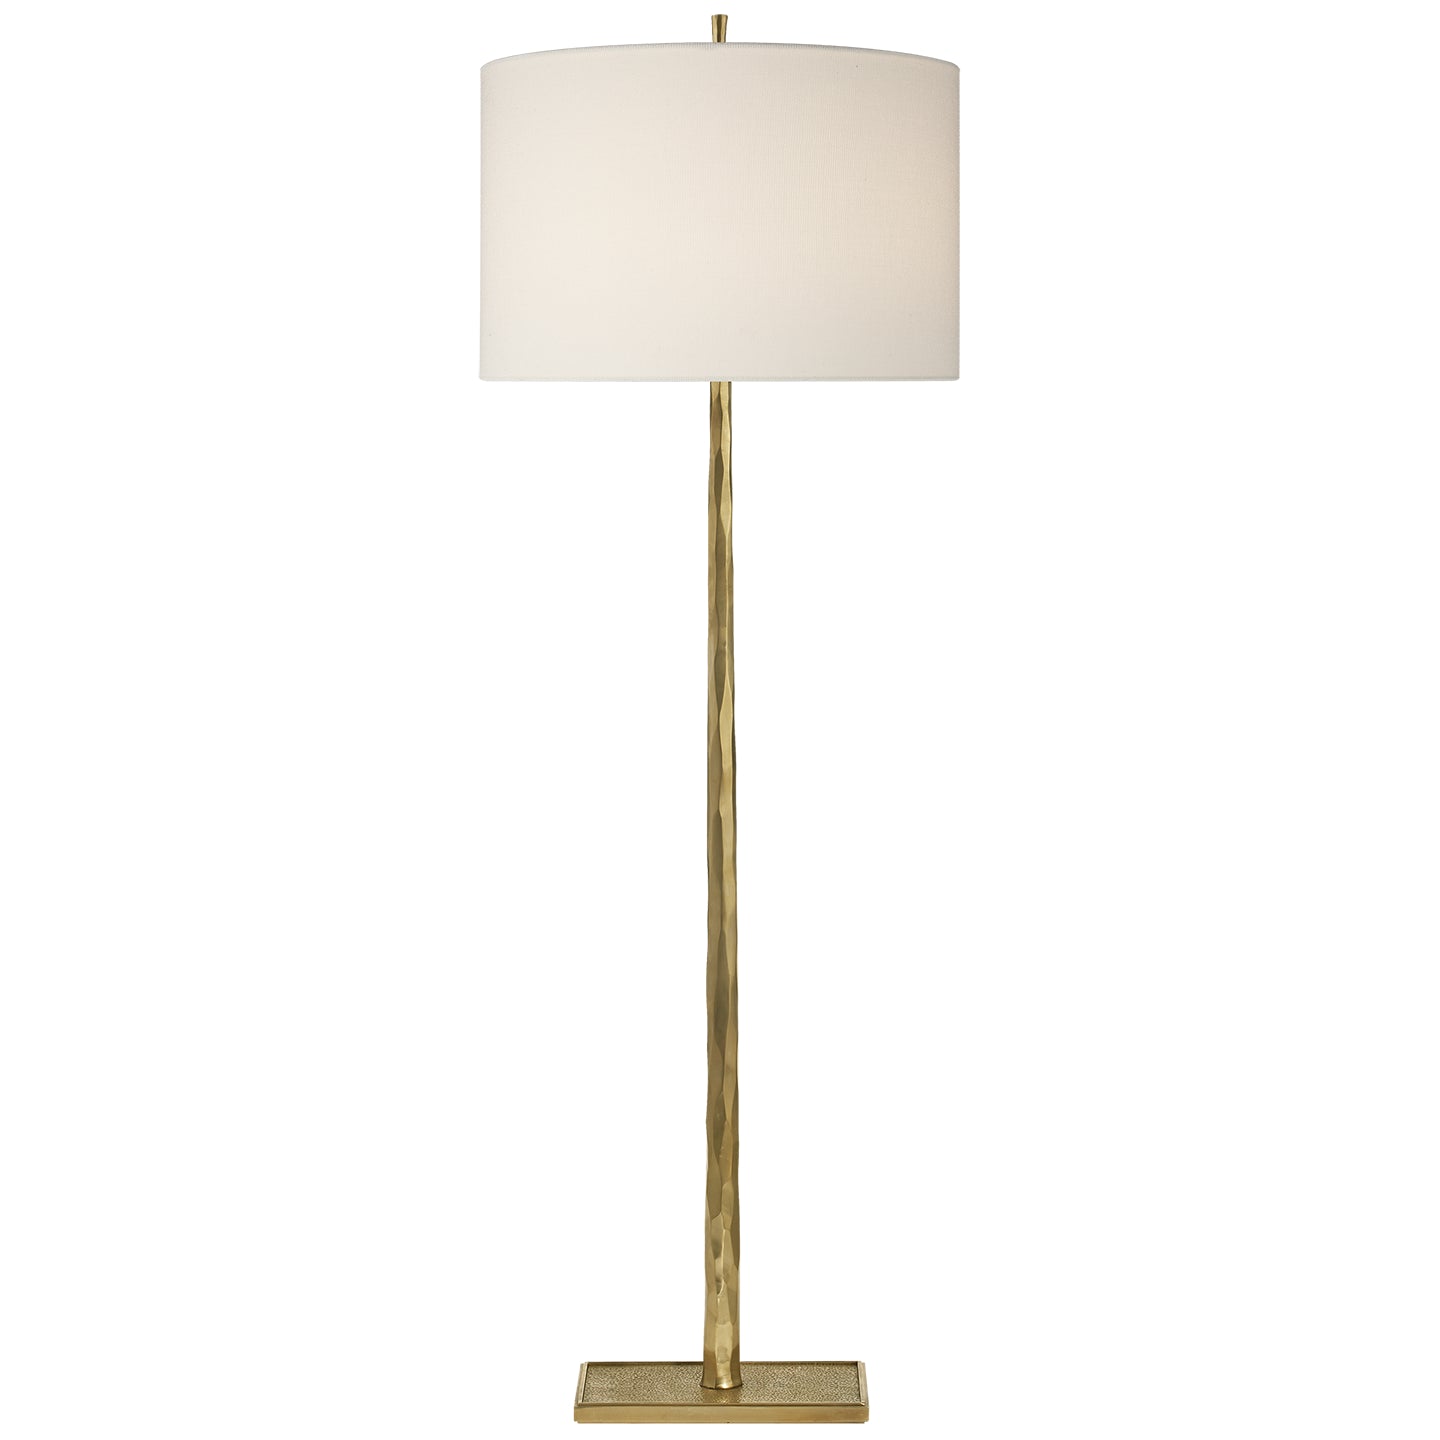 Load image into Gallery viewer, Visual Comfort Signature - BBL 1030SB-L - One Light Floor Lamp - Lyric Branch - Soft Brass
